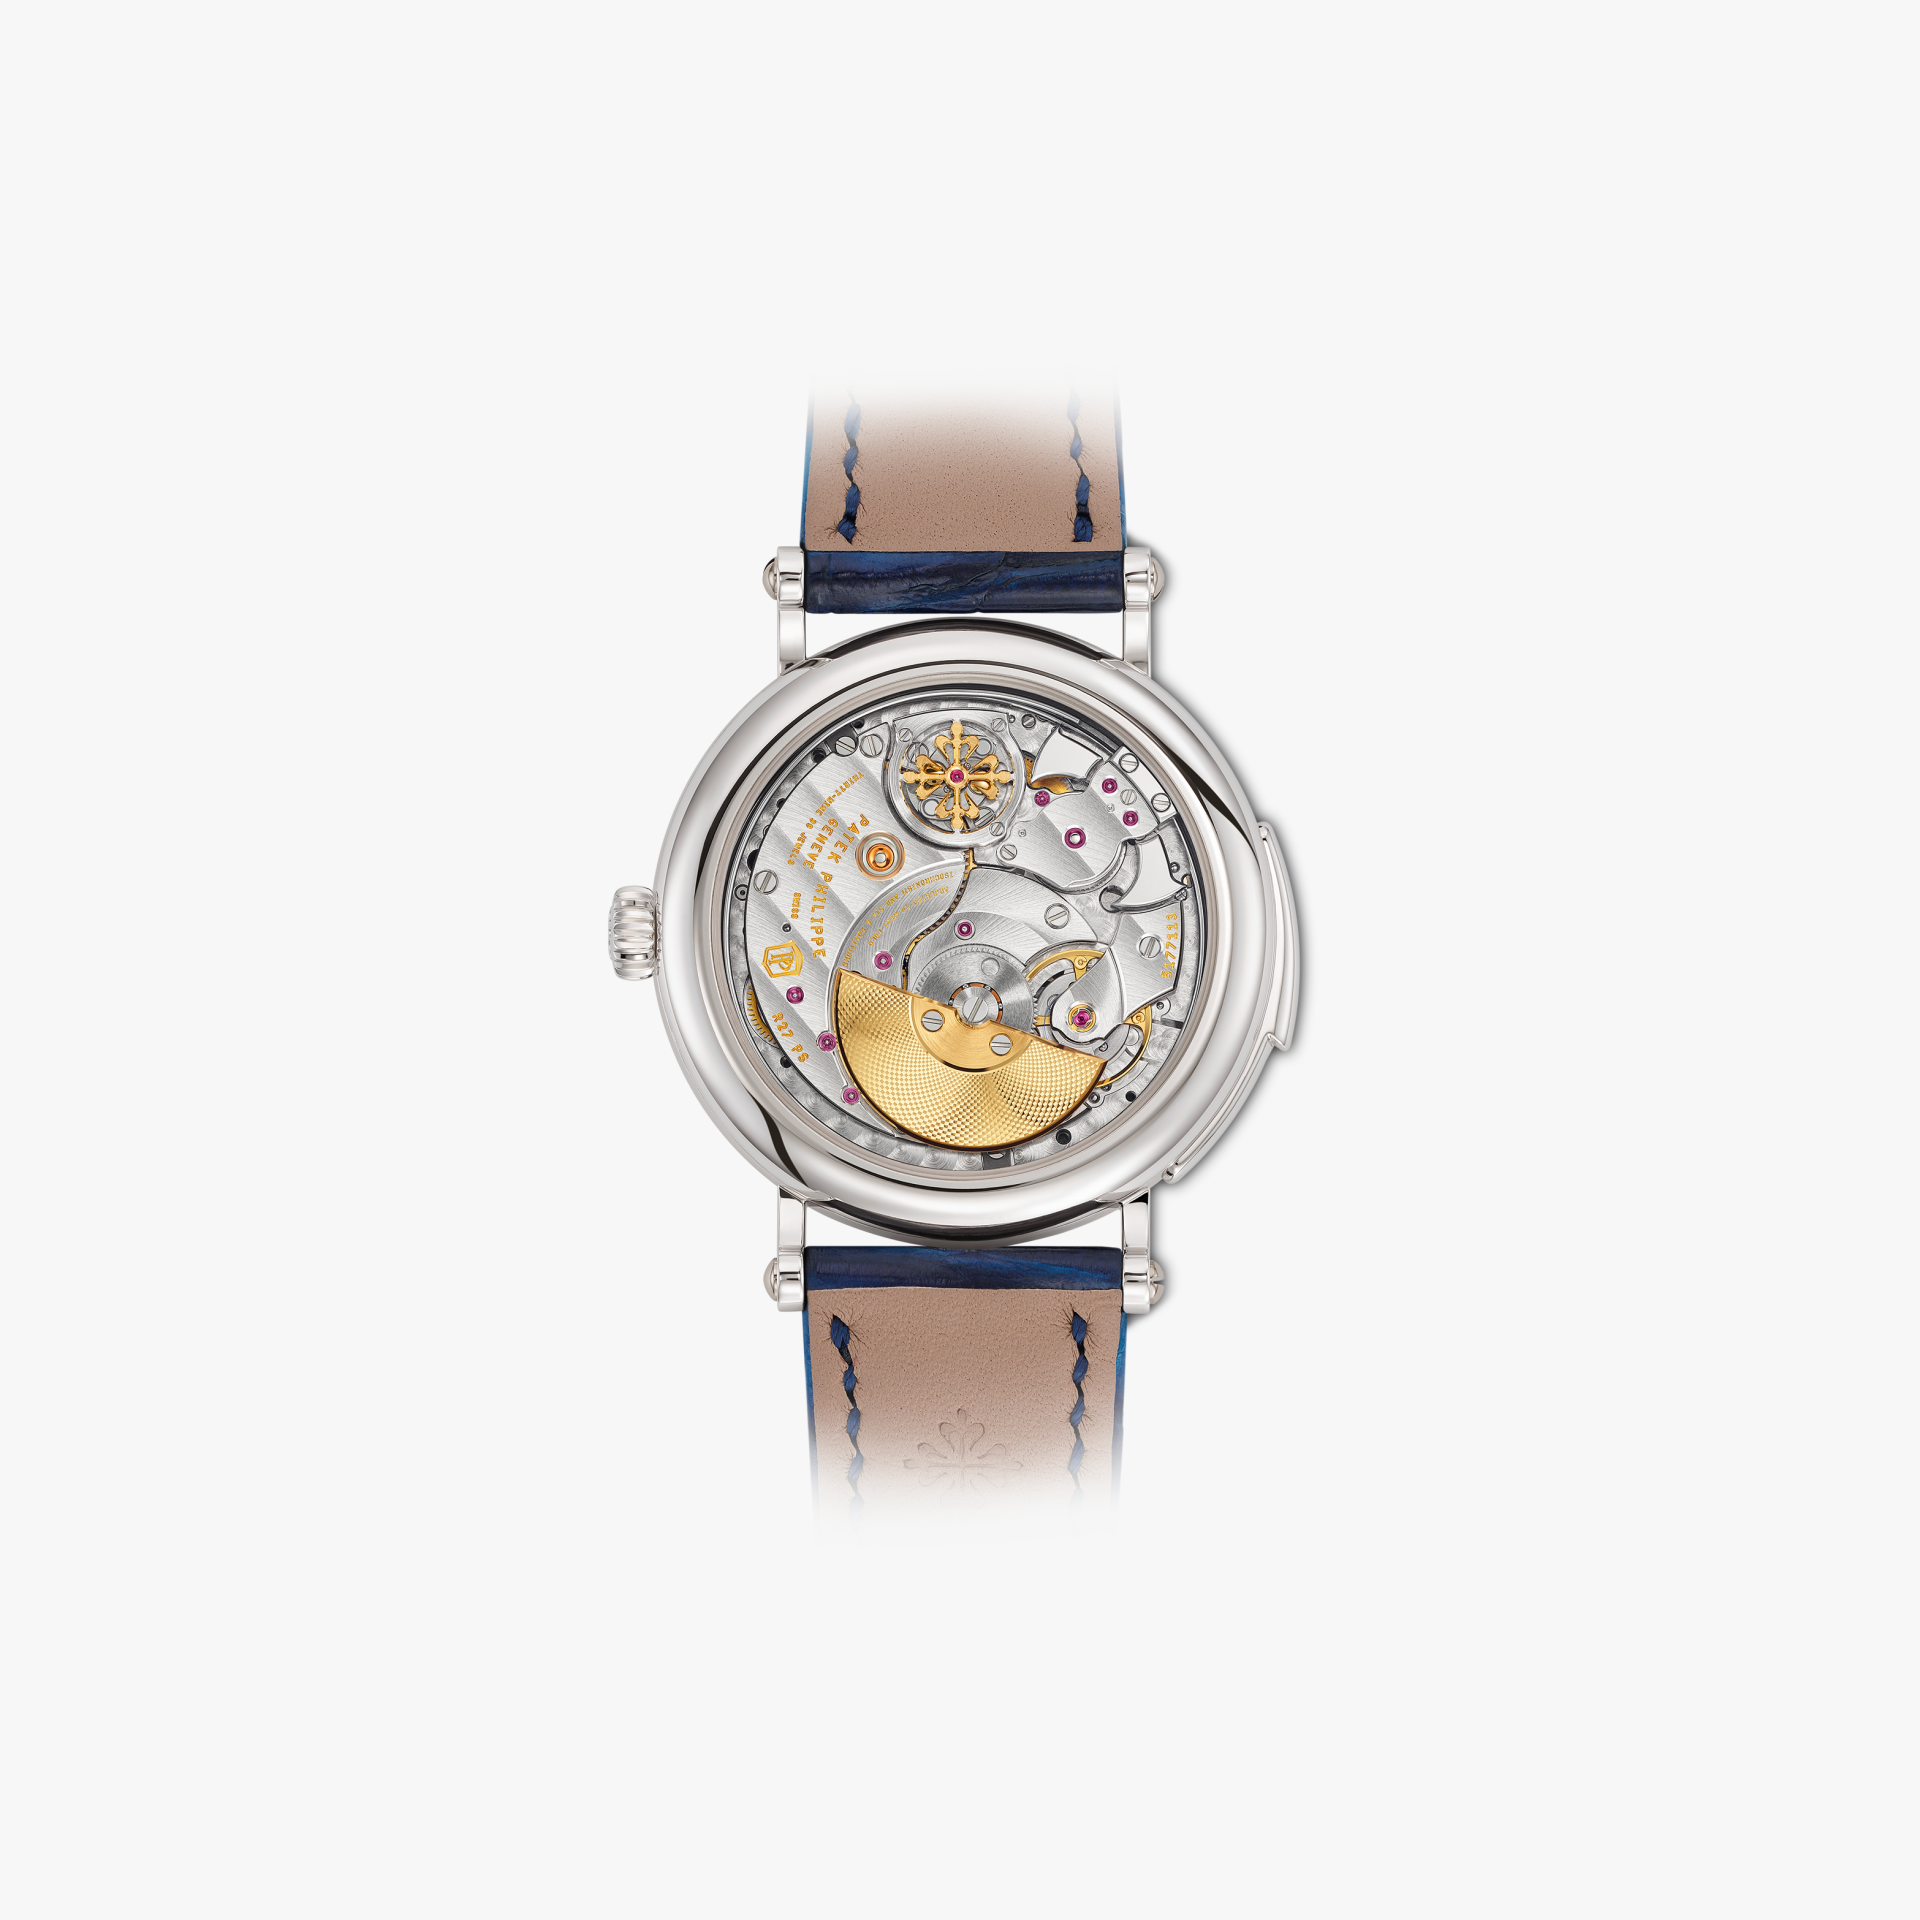 Ladies First Minute Repeater made by Patek Philippe